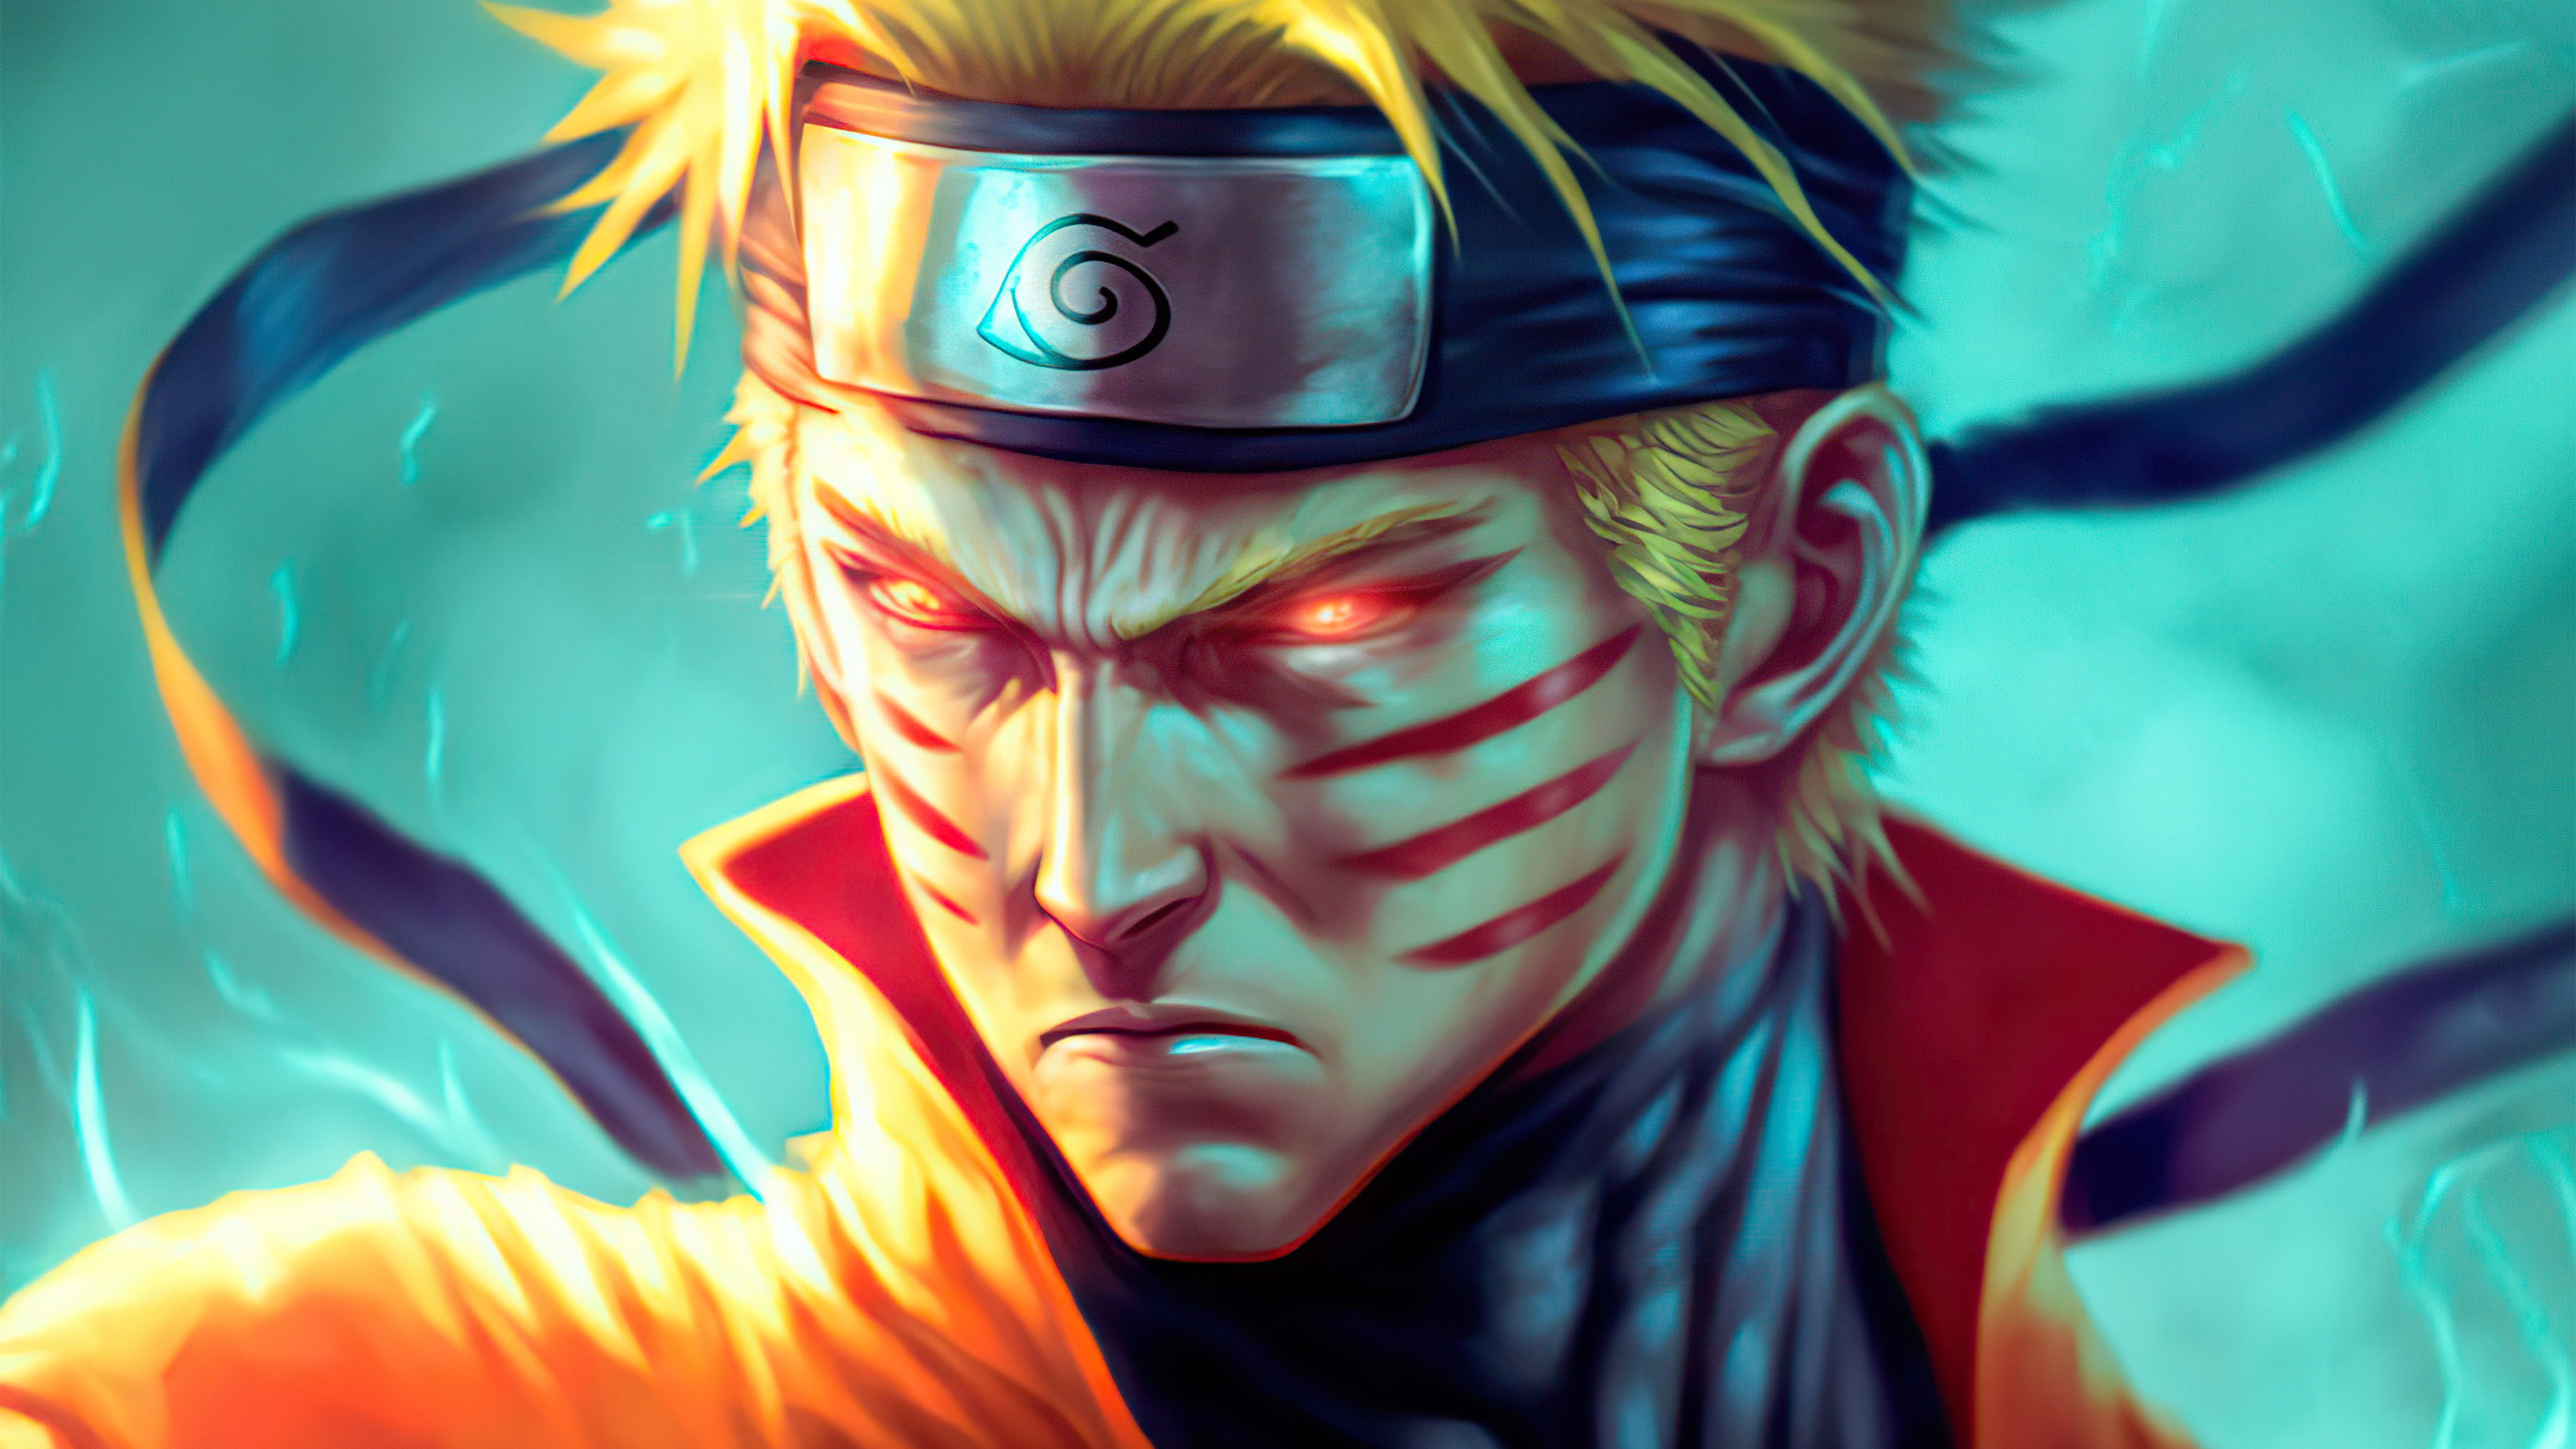 🔥 Naruto wallpapers 4k | Ultra HD 2018 🔥 APK pour Android Télécharger